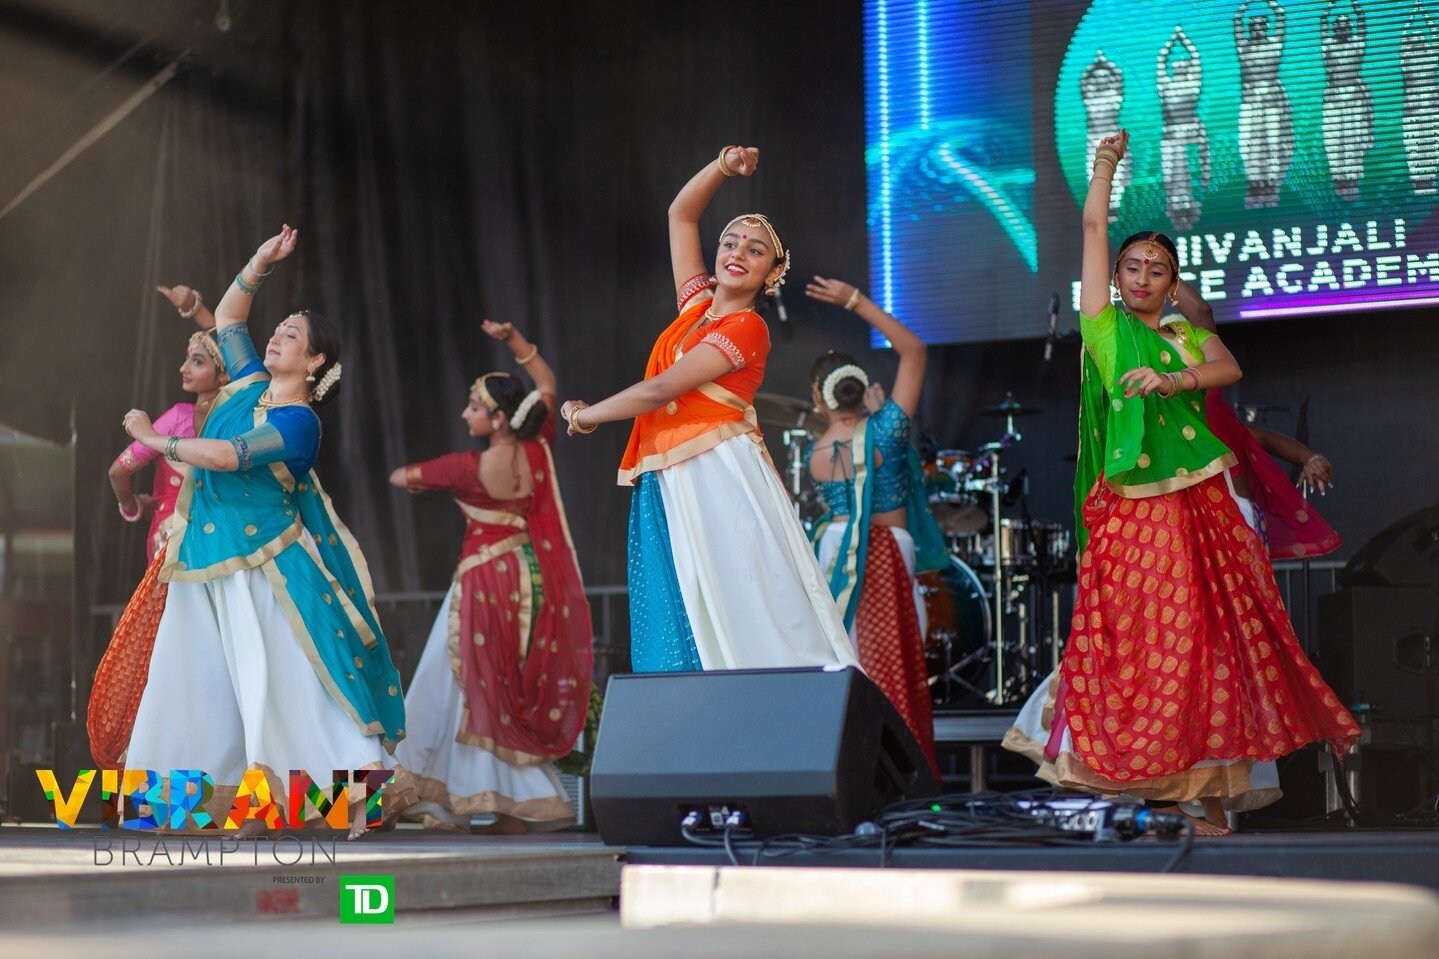 We had such an amazing time with Shivanjali Dance School on stage who performed a beautiful live performance for Vibrant Brampton, presented by @td_canada! Thank you to everyone who came out to see the show! 🎉🎉

Photography by: @boss_culture &amp; 